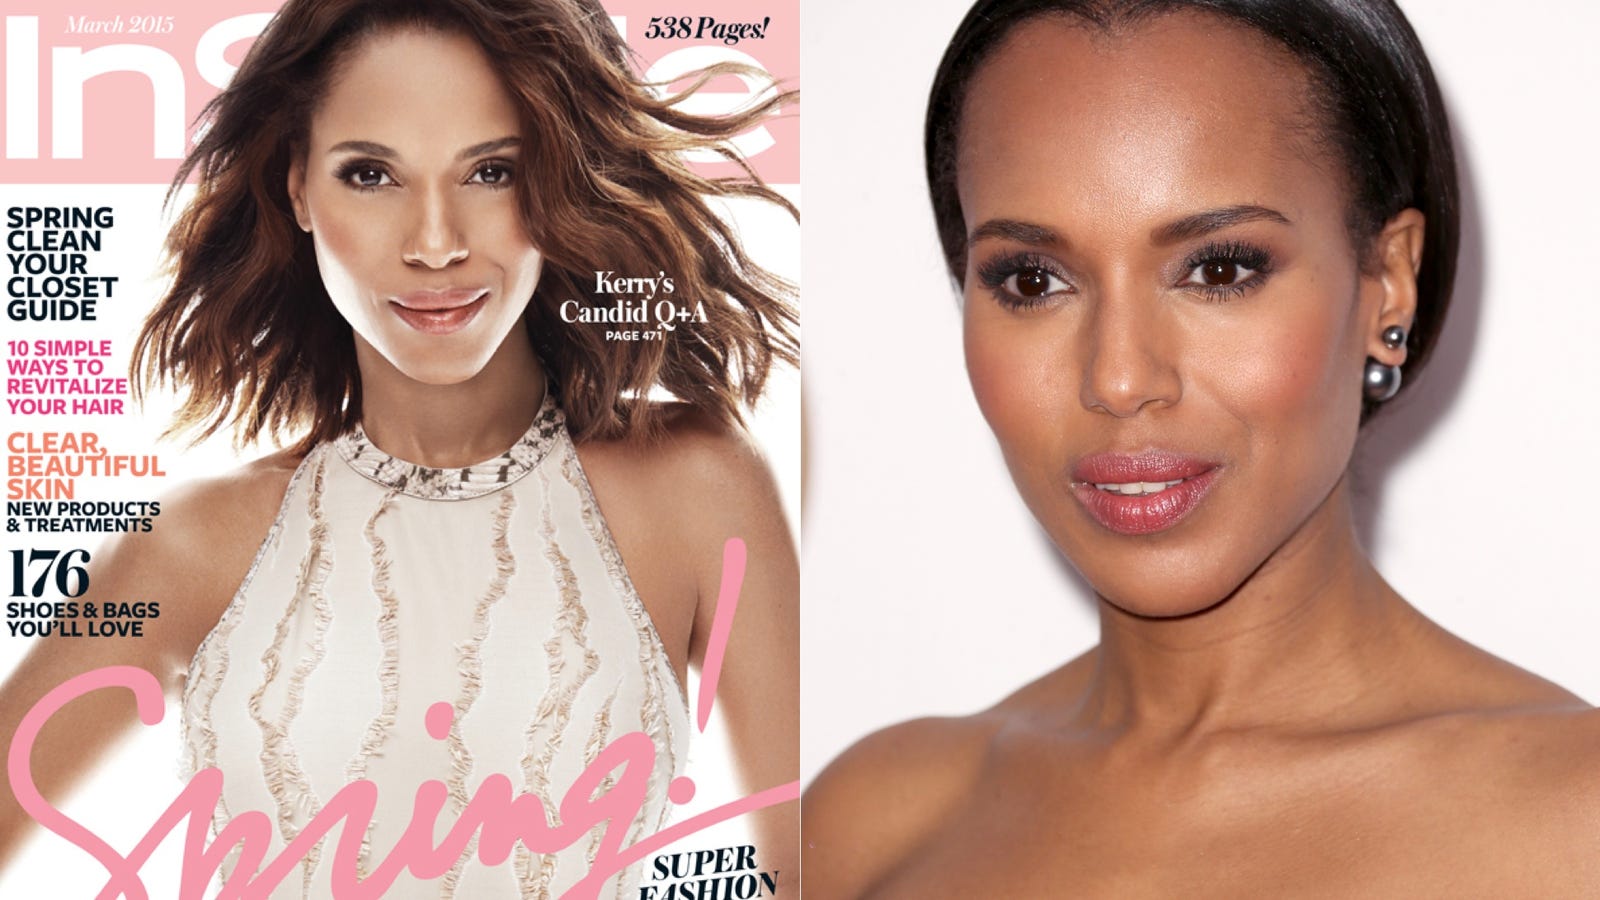 Instyle And Kerry Washington Respond To Her Lightened Cover